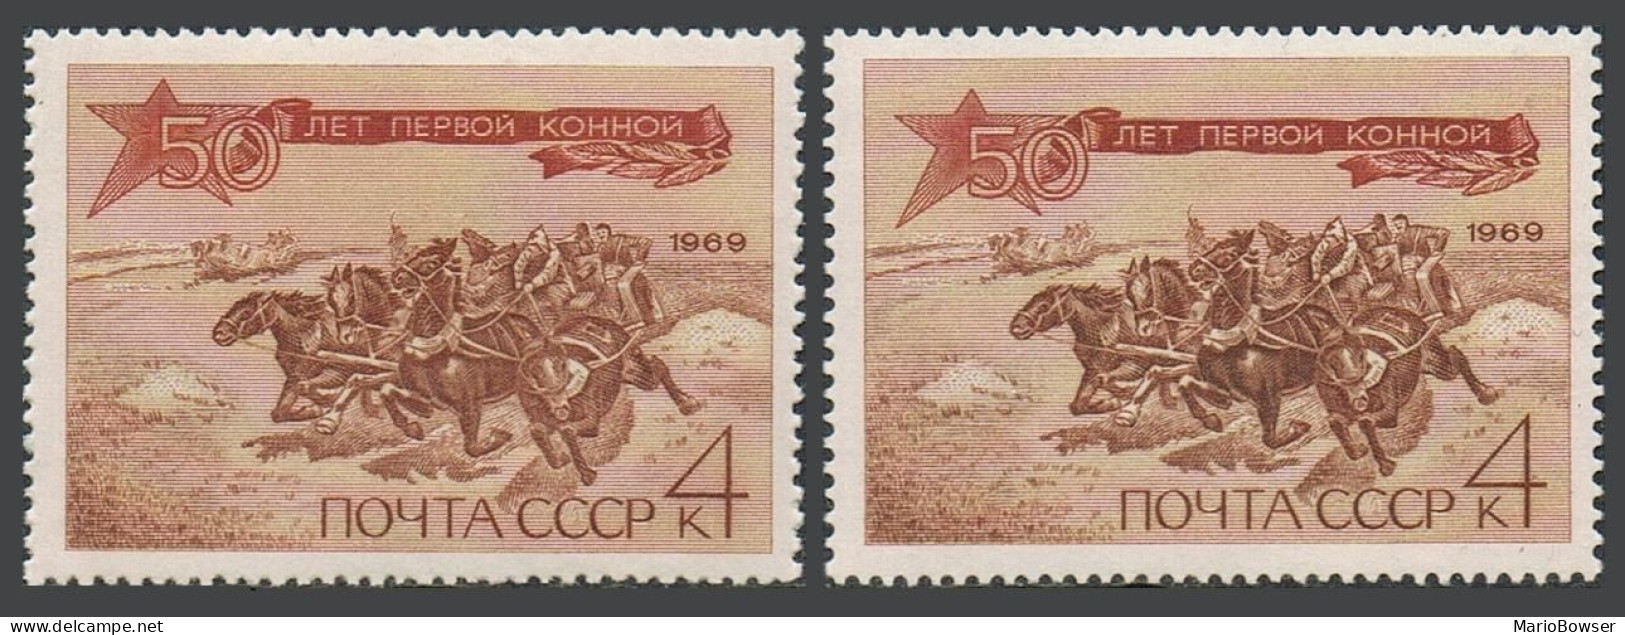 Russia 3623 Two Varieties,MNH.Michel 3650. First Mounted Army,50th Ann.1969. - Ongebruikt